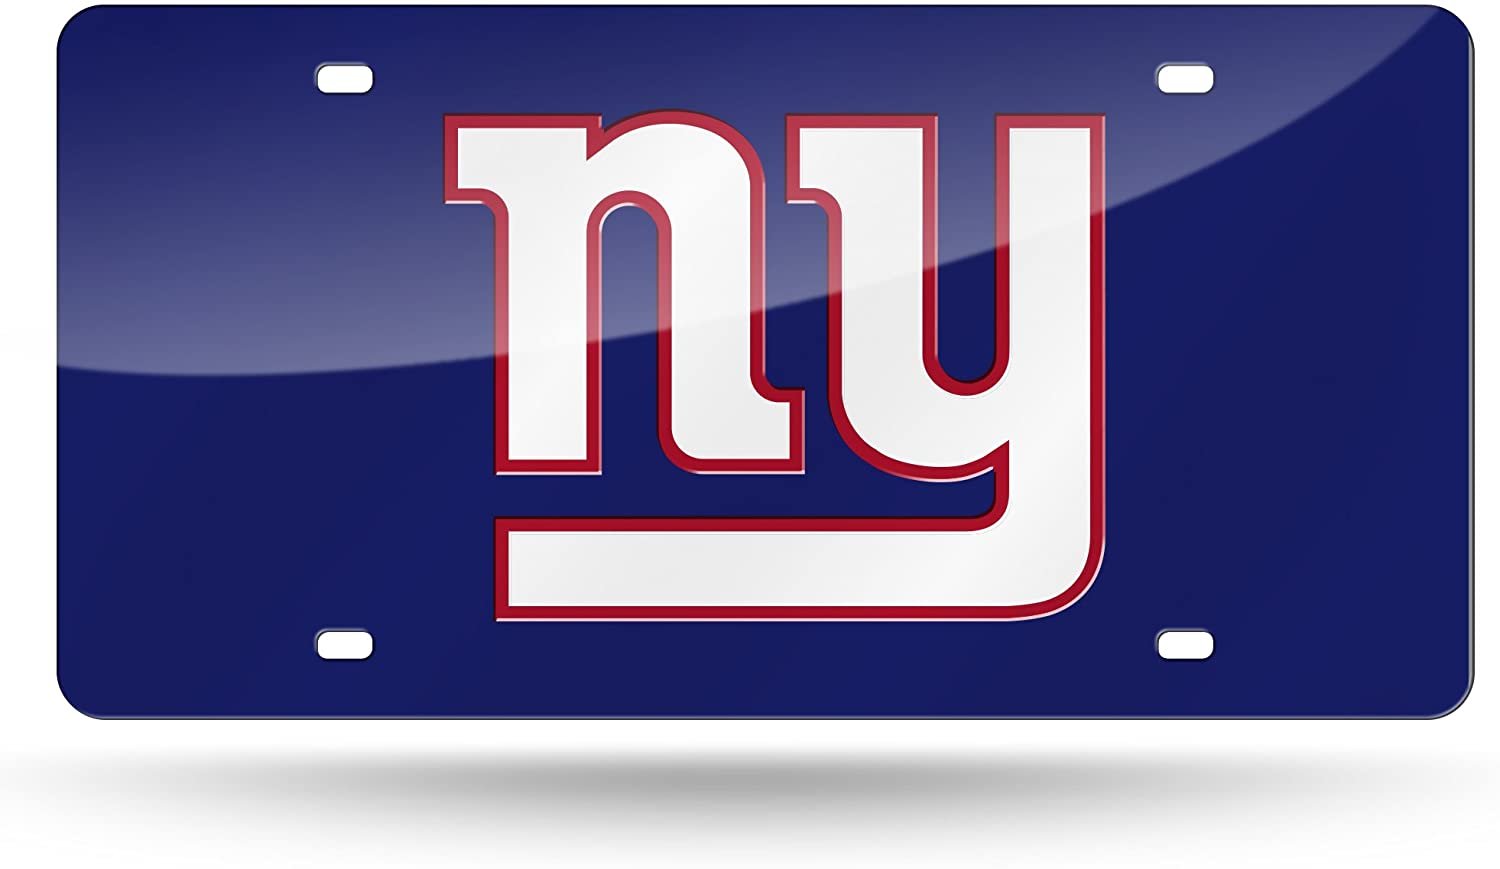 New York Giants Premium Laser Cut Tag License Plate, Blue Mirrored Acrylic Inlaid, 12x6 Inch